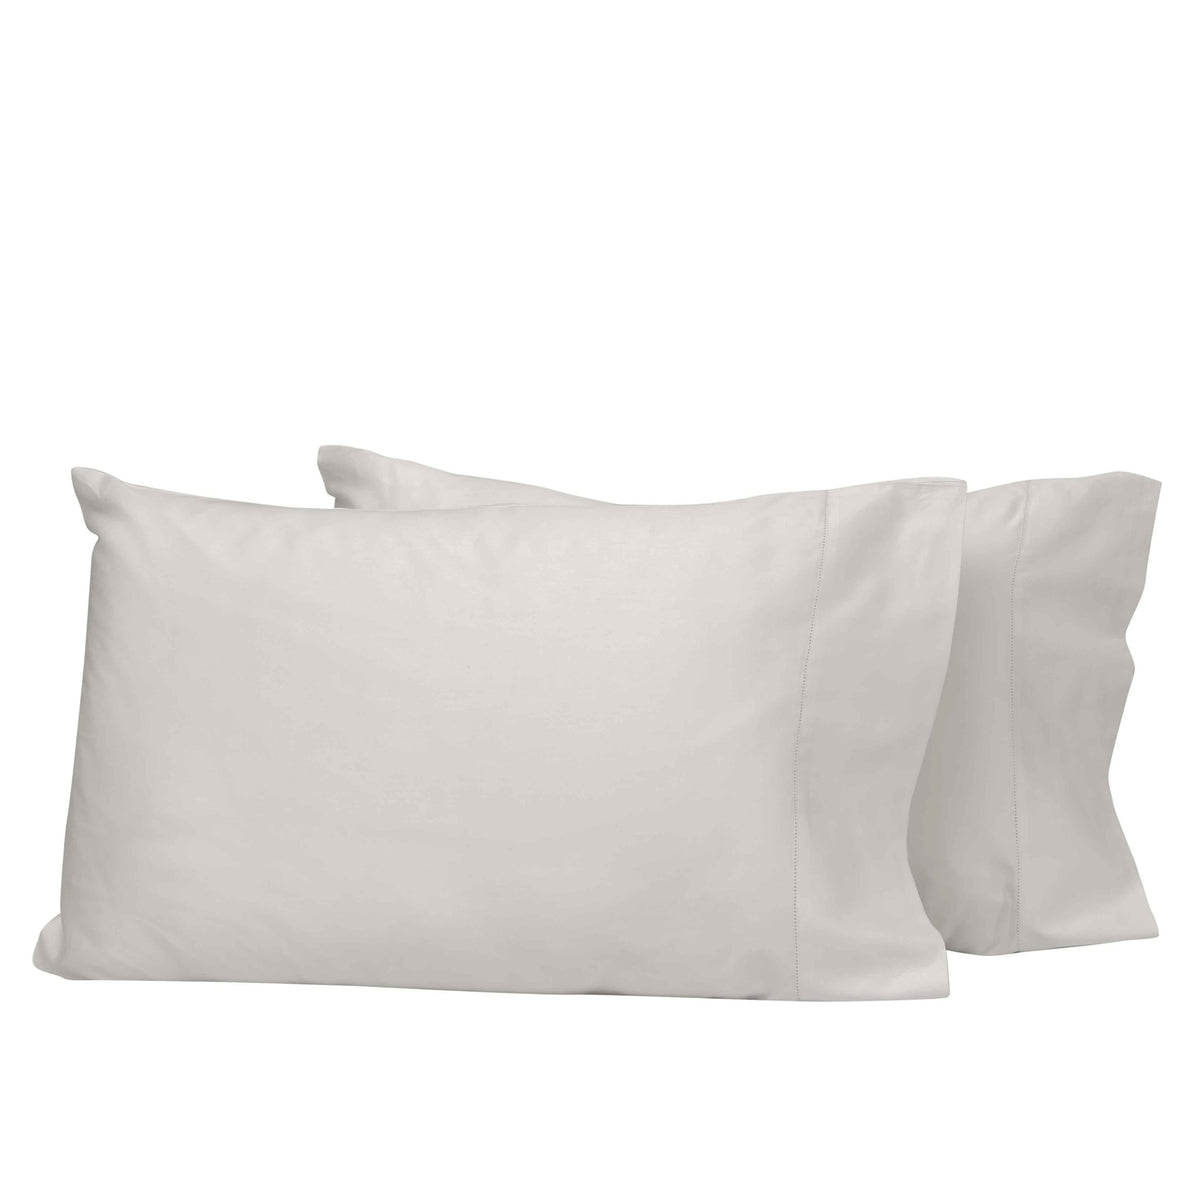 Clear Image of Signoria Tuscan Dreams Pillowcases in Pearl Color